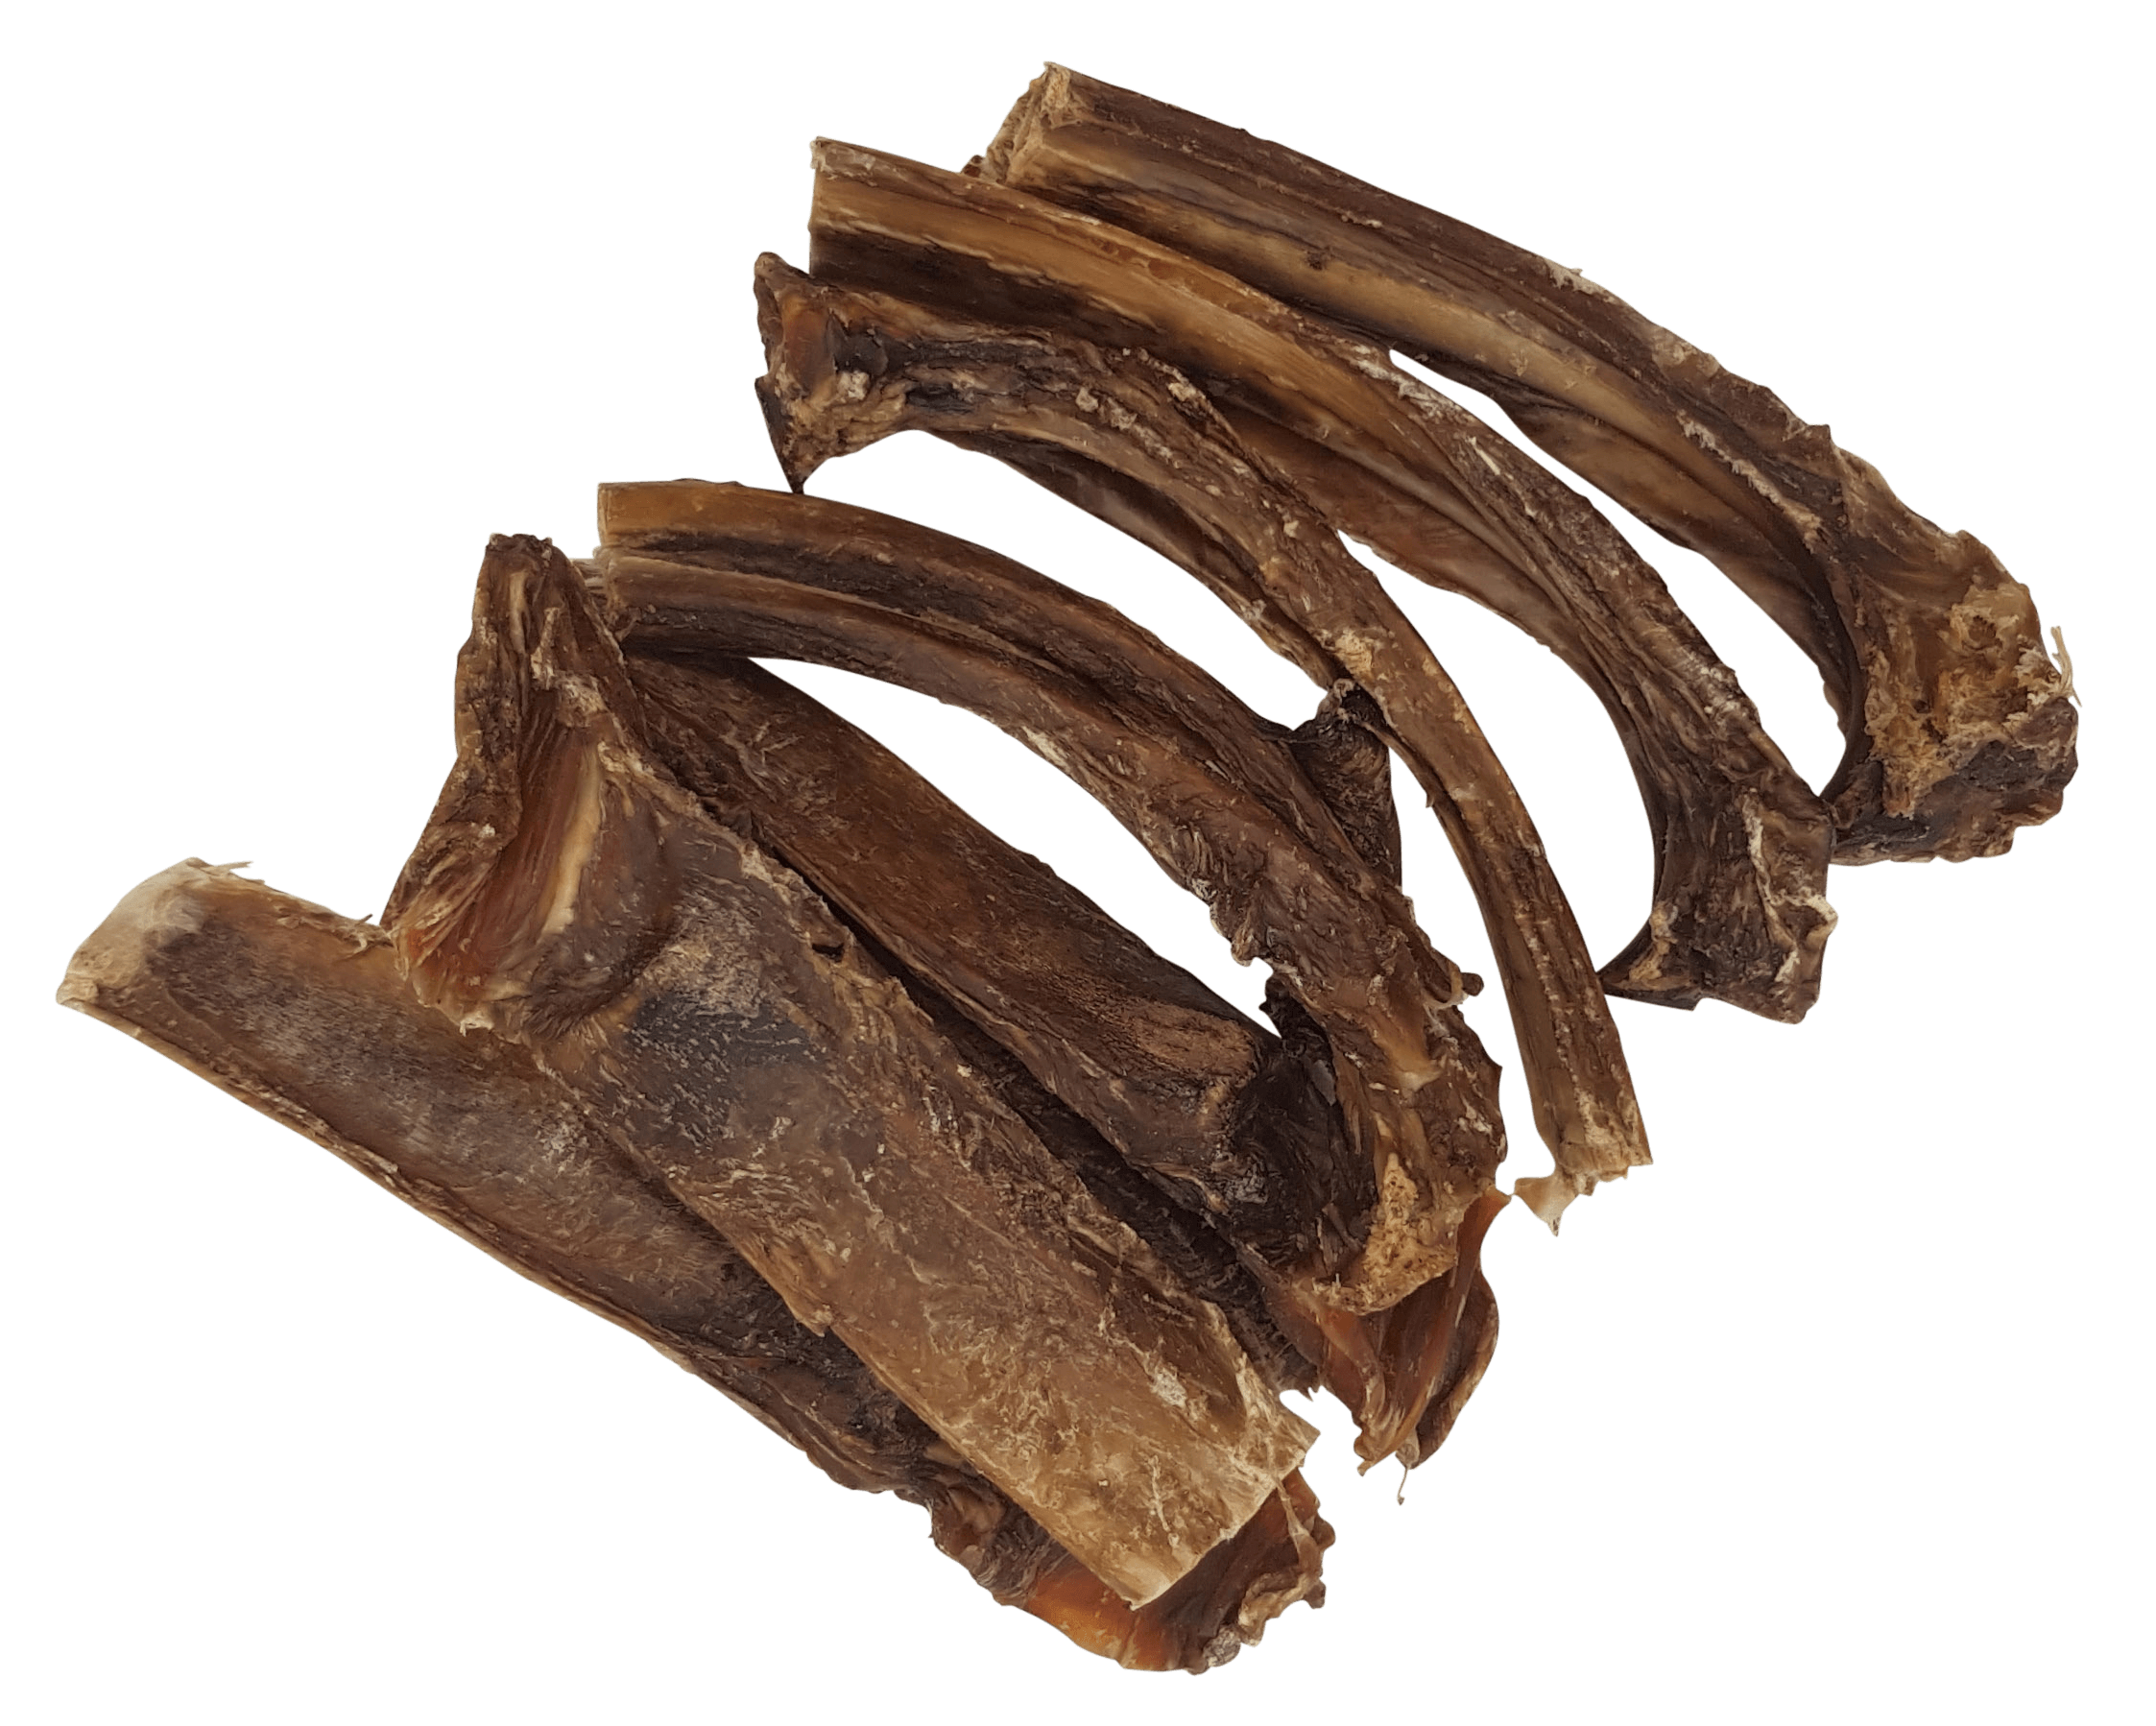 beef ribs treats for dogs,, nutritional treats for dogs, best dog treats in Australia, natural dog treats, beef treats